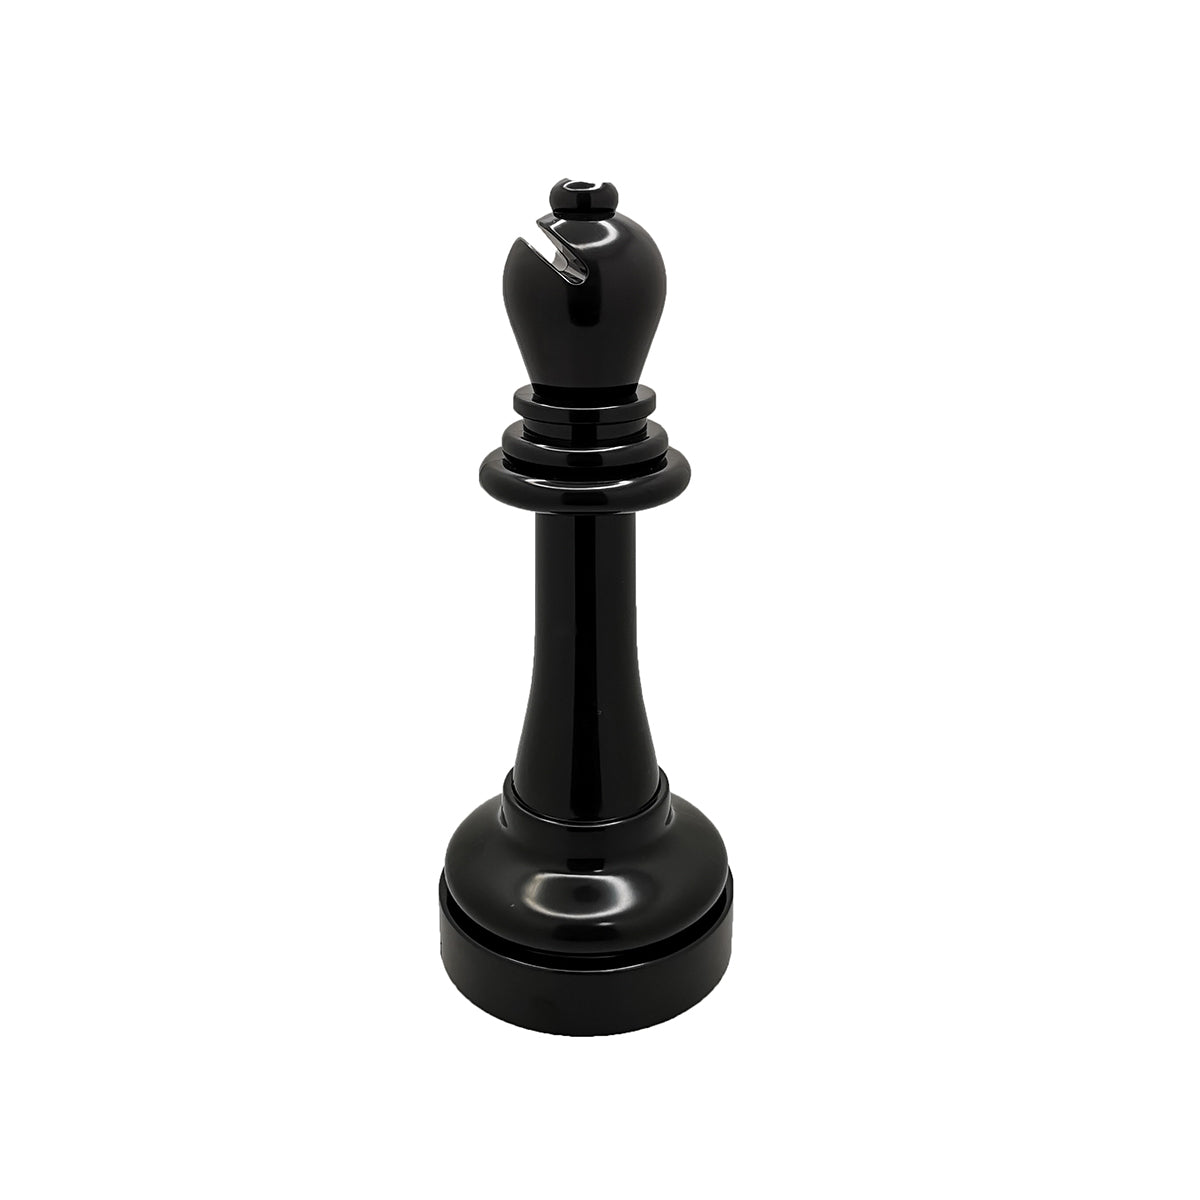 Giant Garden Chess 43cm Replacement Pieces Black Bishop